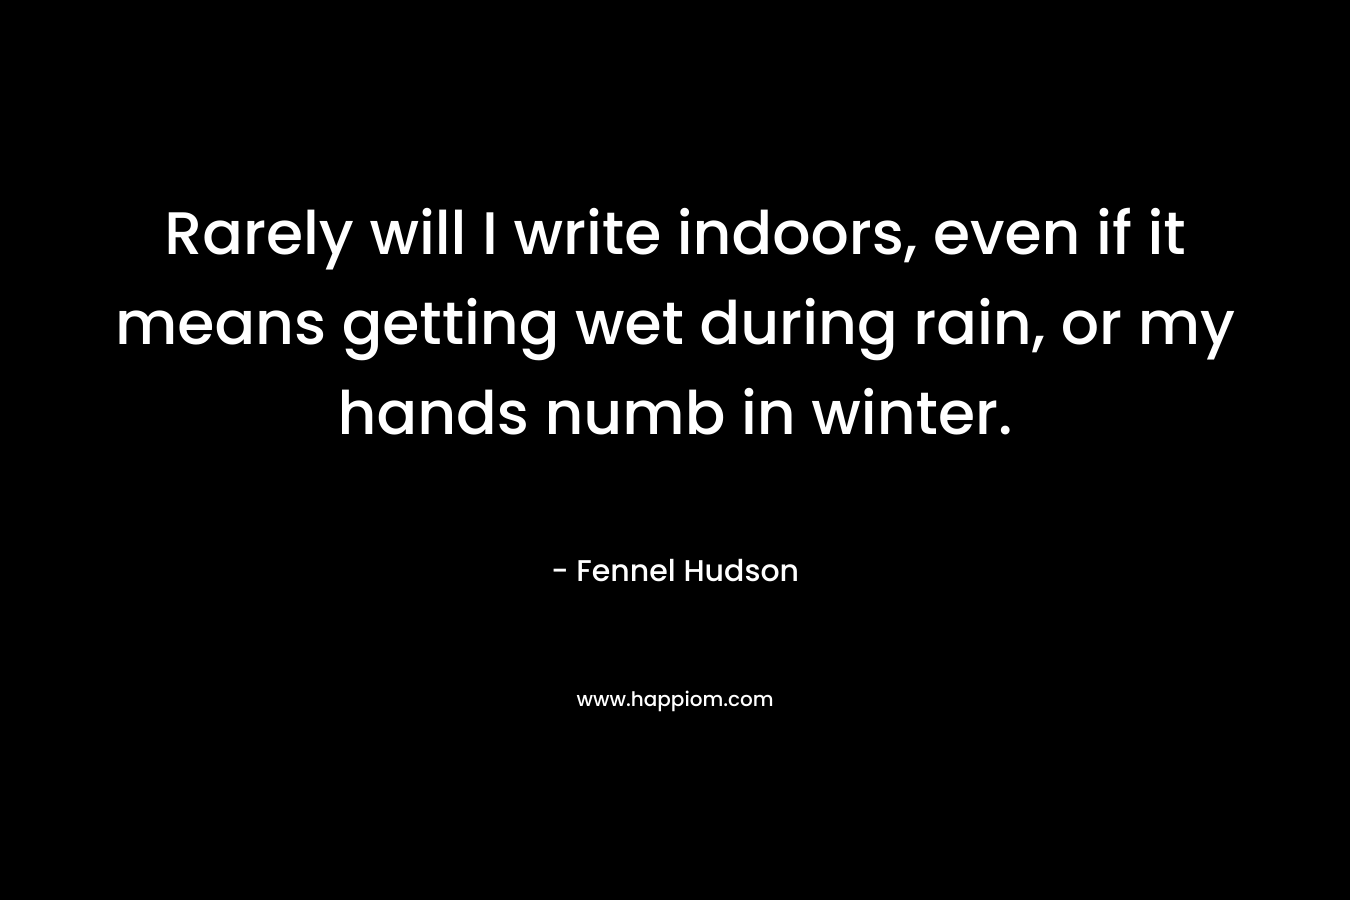 Rarely will I write indoors, even if it means getting wet during rain, or my hands numb in winter.